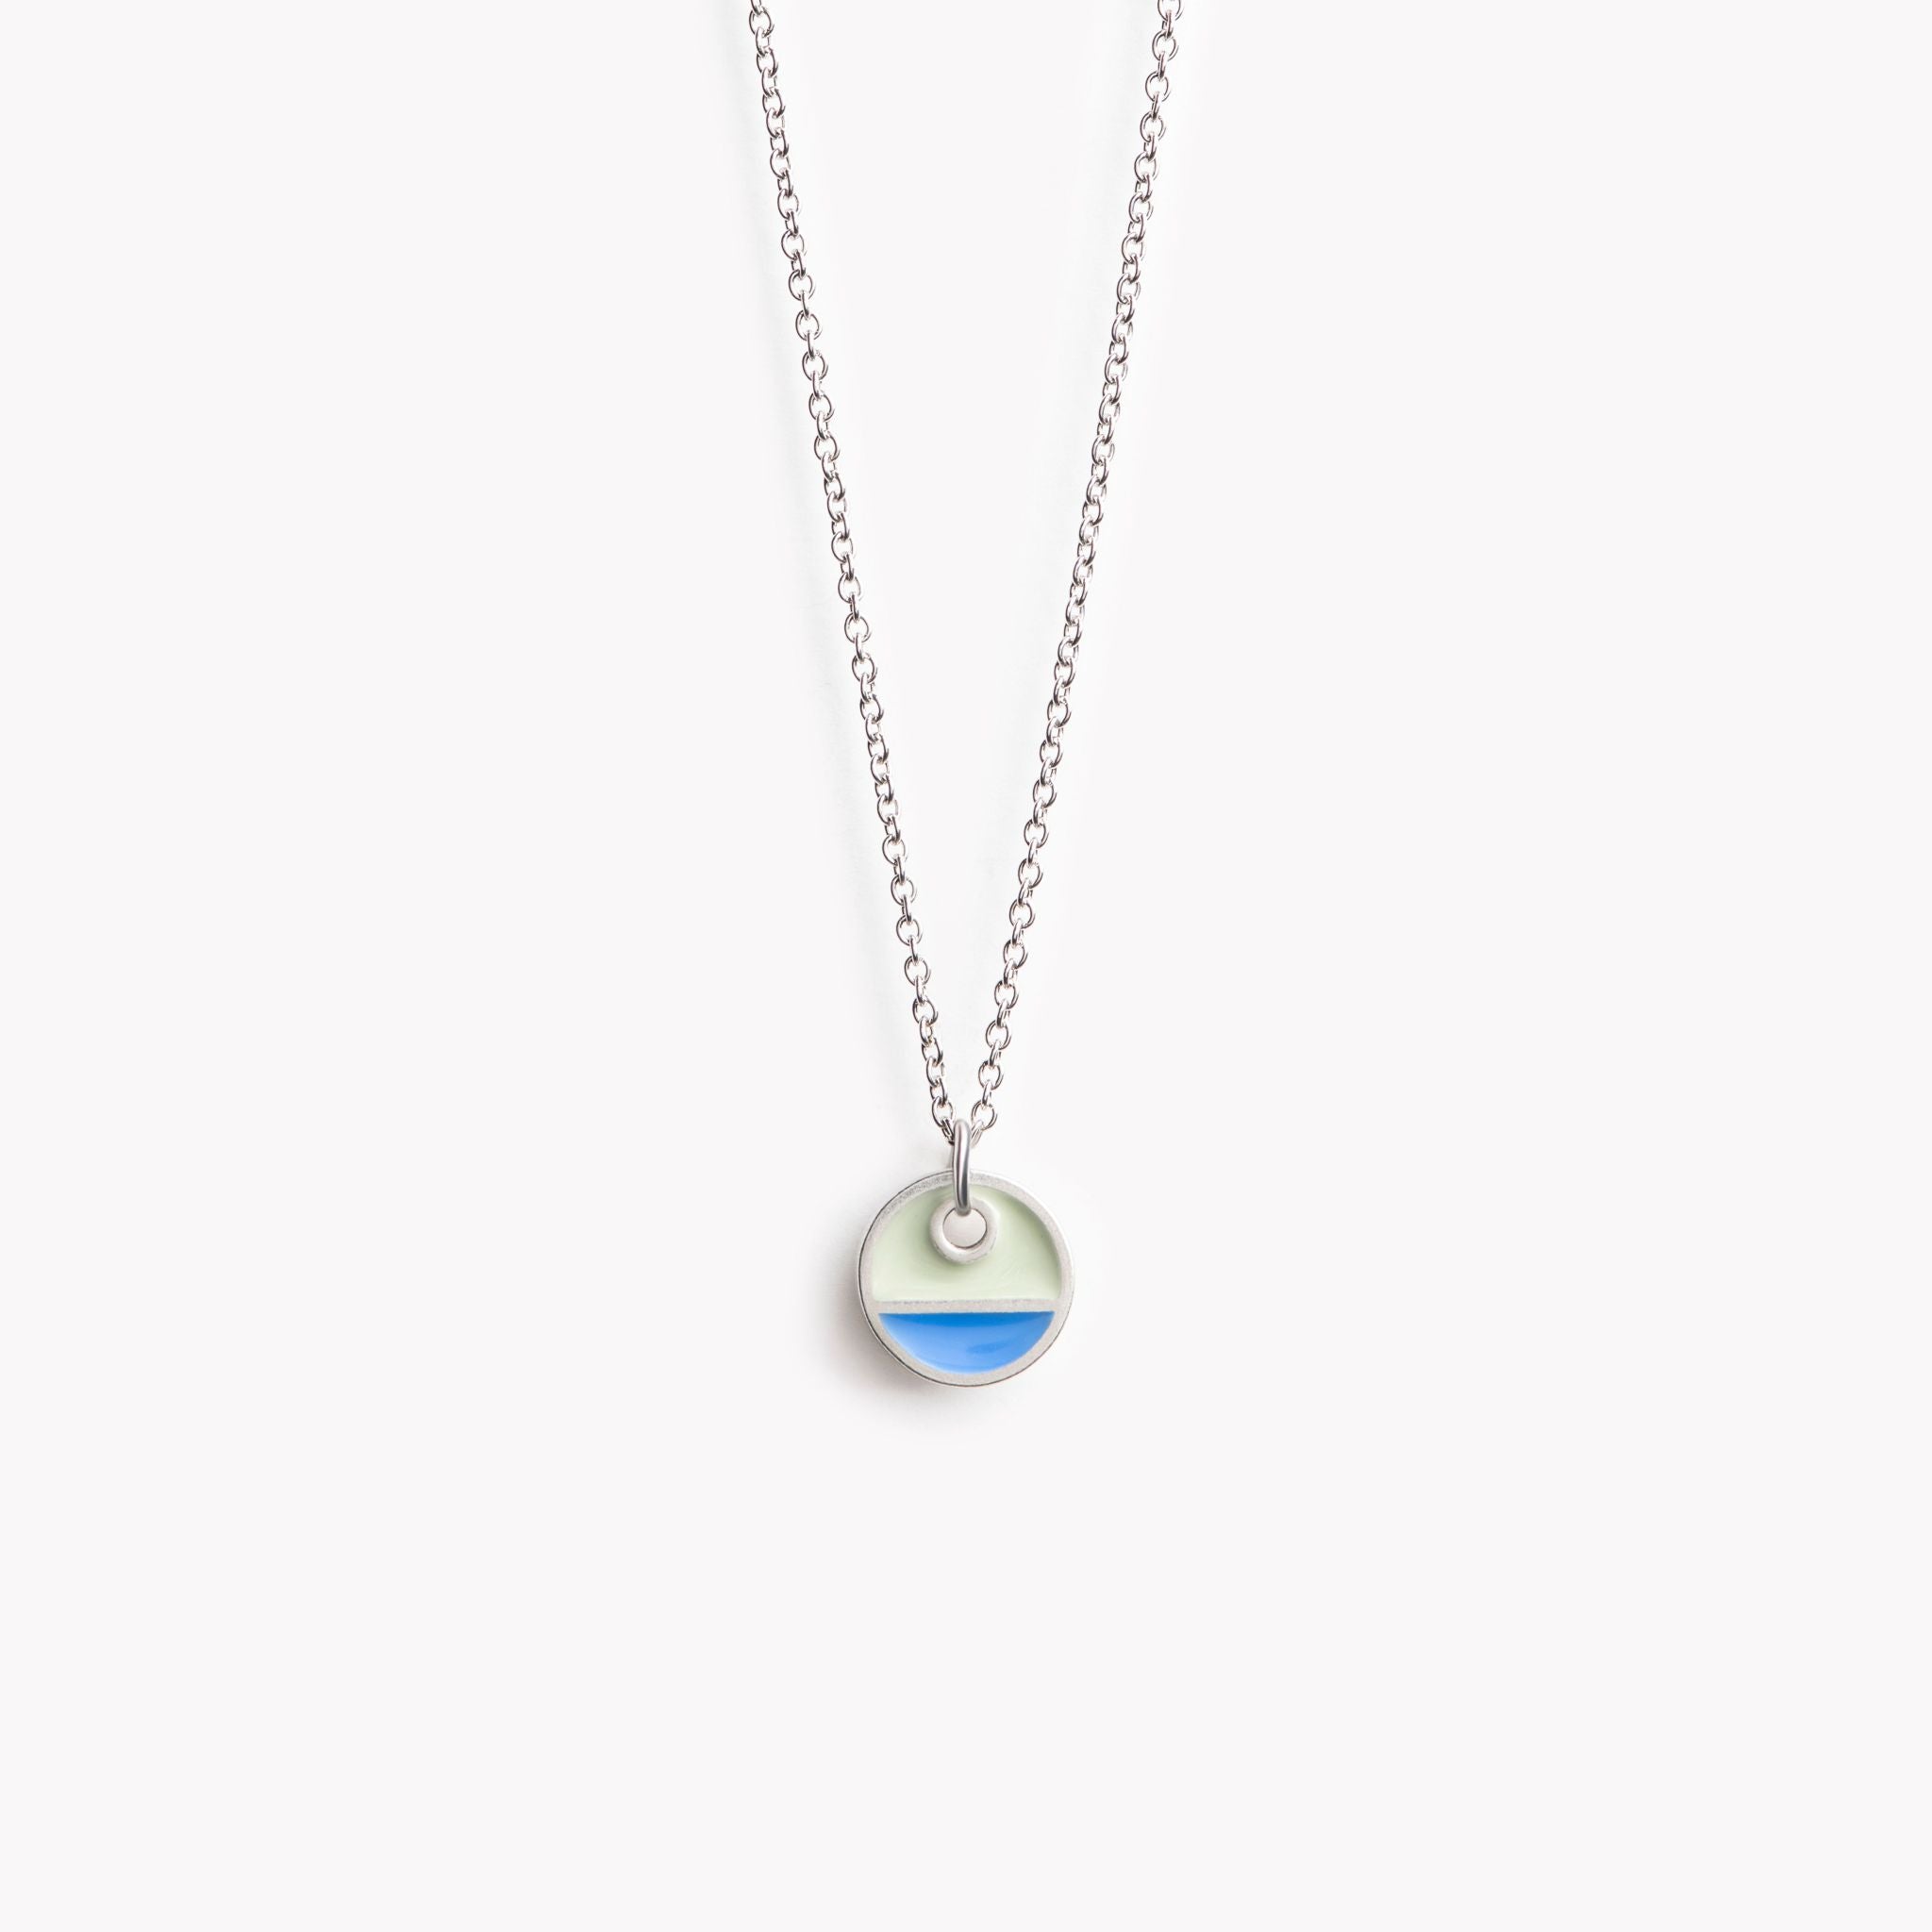 A simple circular pendant necklace with a horizontal division. In blue and grey.